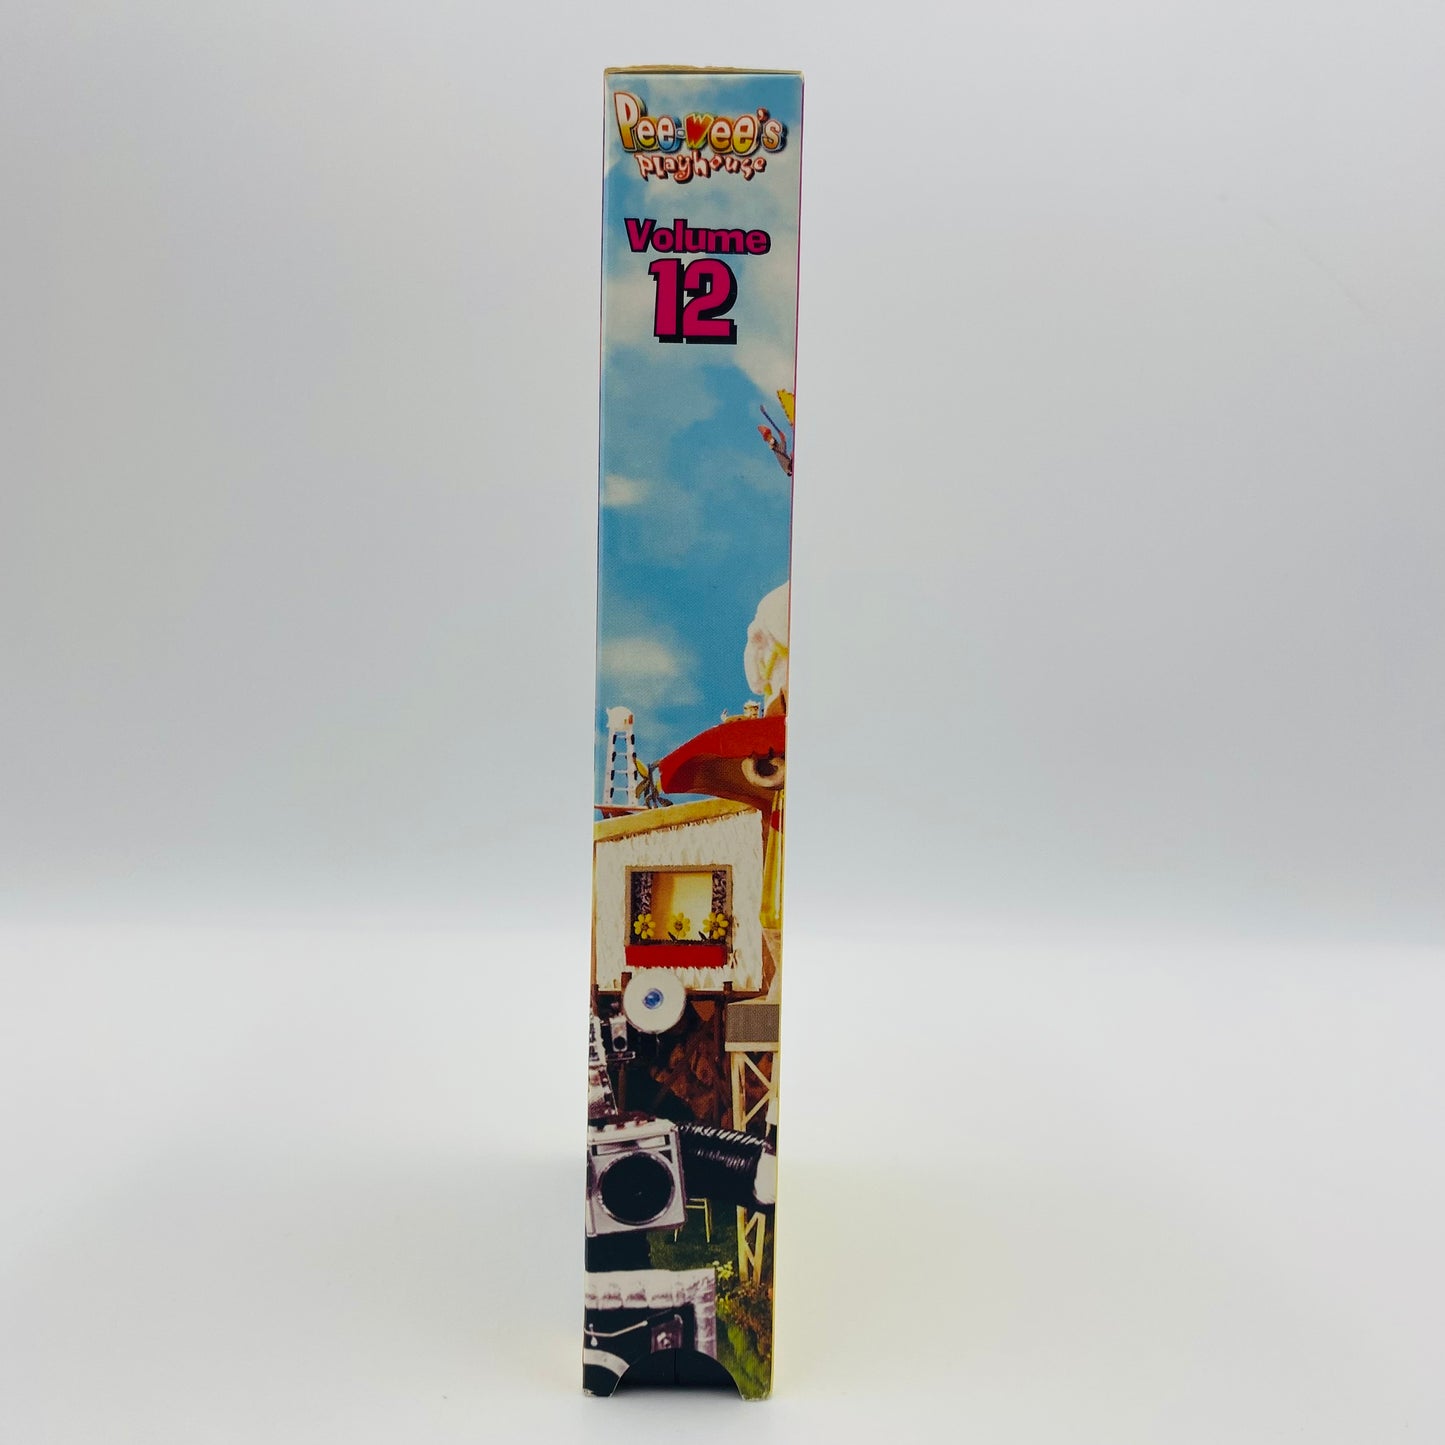 Pee-Wee’s Playhouse volume 12 VHS tape (1996) MGM/UA Home Video